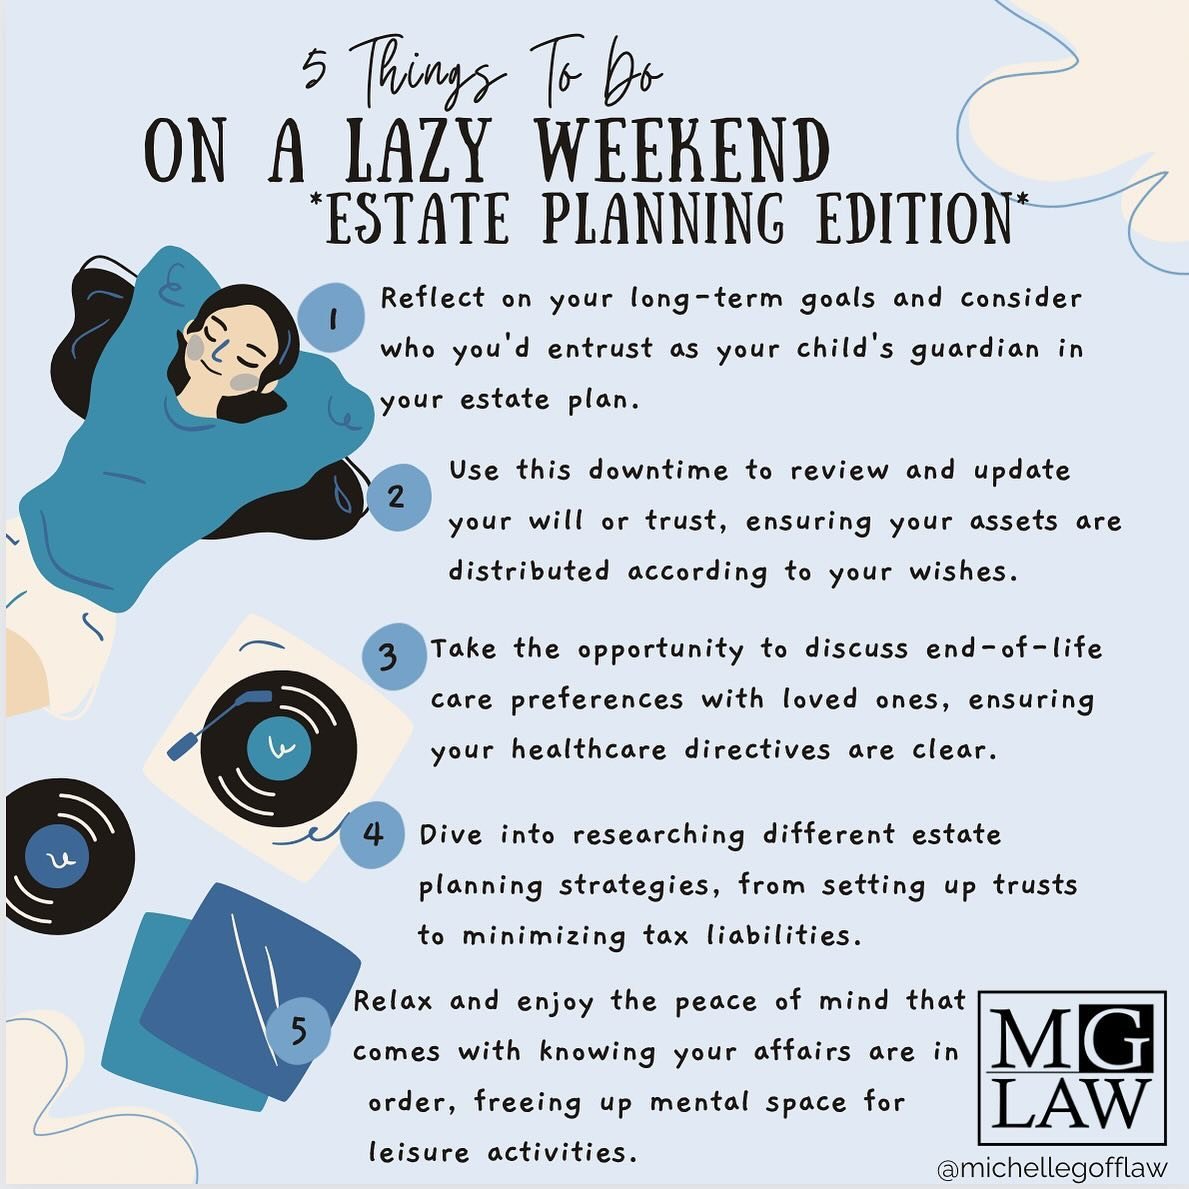 🏡✨ Weekend Estate Planning Checklist! Here are 5 things you can do to secure your future while relaxing:1️⃣ Reflect on long-term goals and choose a guardian for your child in your estate plan. 2️⃣ Review and update your will or trust to align with y